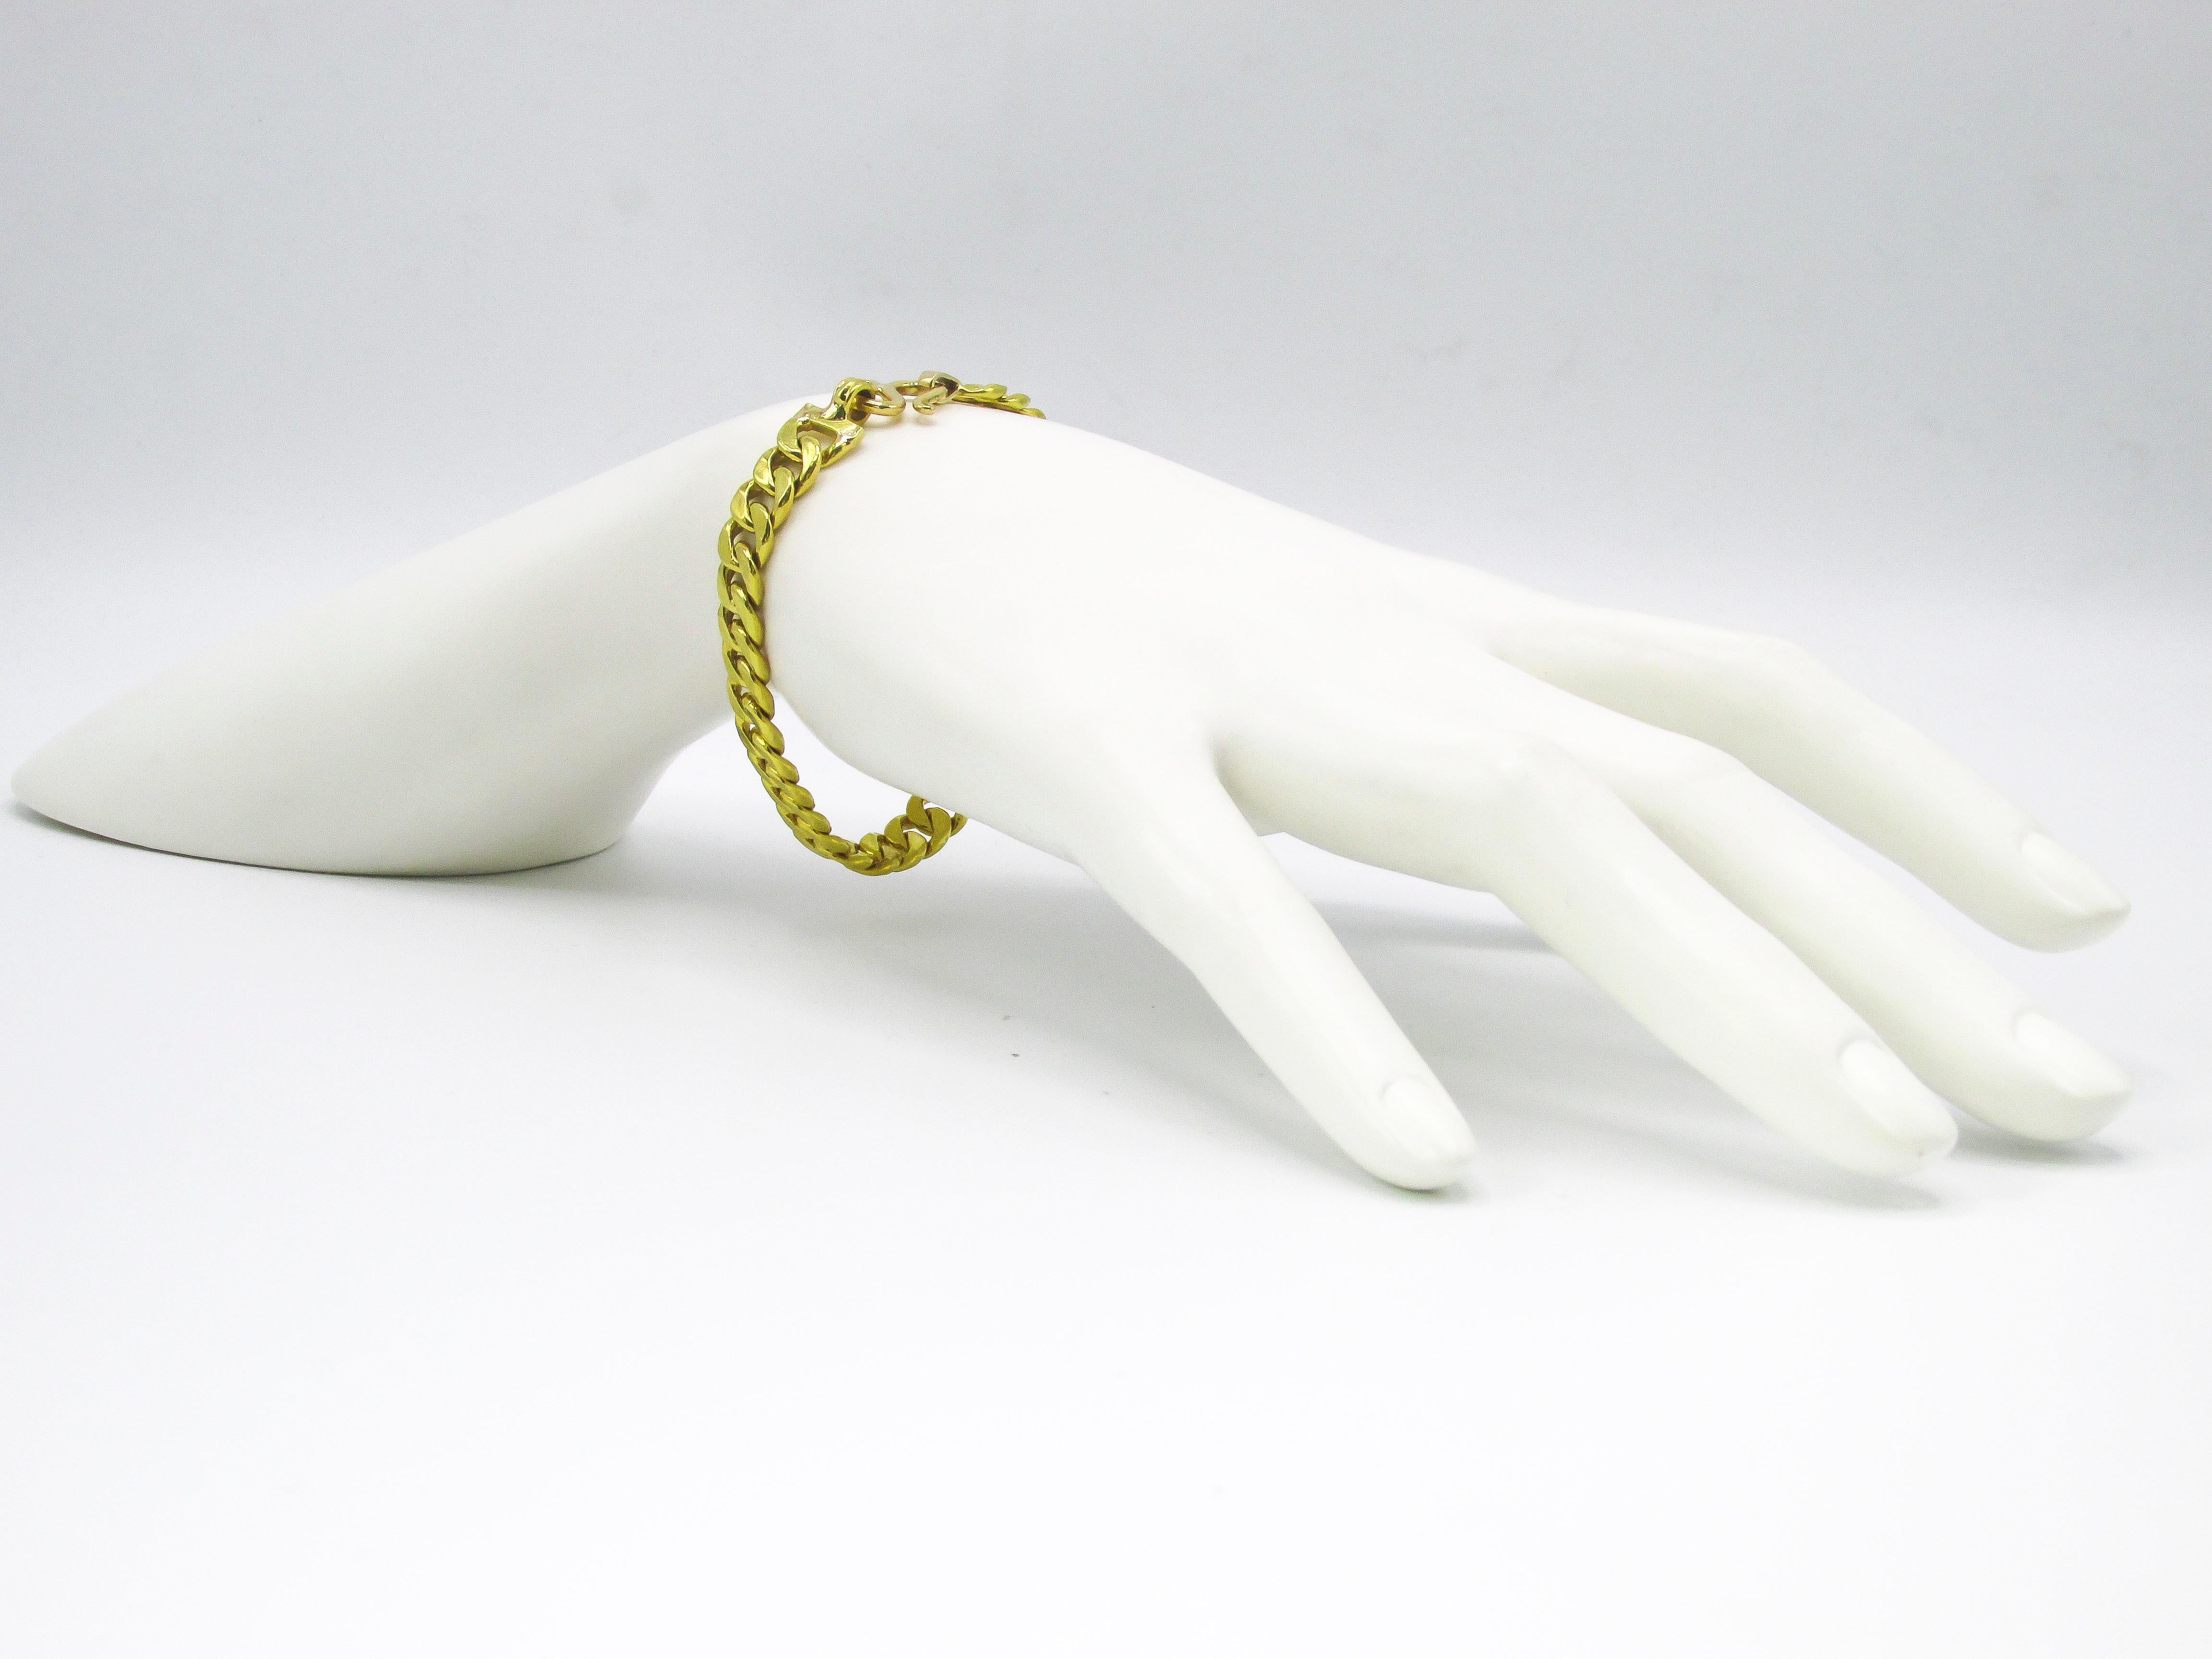 Well handcrafted 18 karat yellow gold flat curb link bracelet secured by an easy to maneuver and comfortable S-shaped hook lock. The elegant yet casual bracelet has a length of 7 inches leaving room for it to flow partially over ones wrist. An